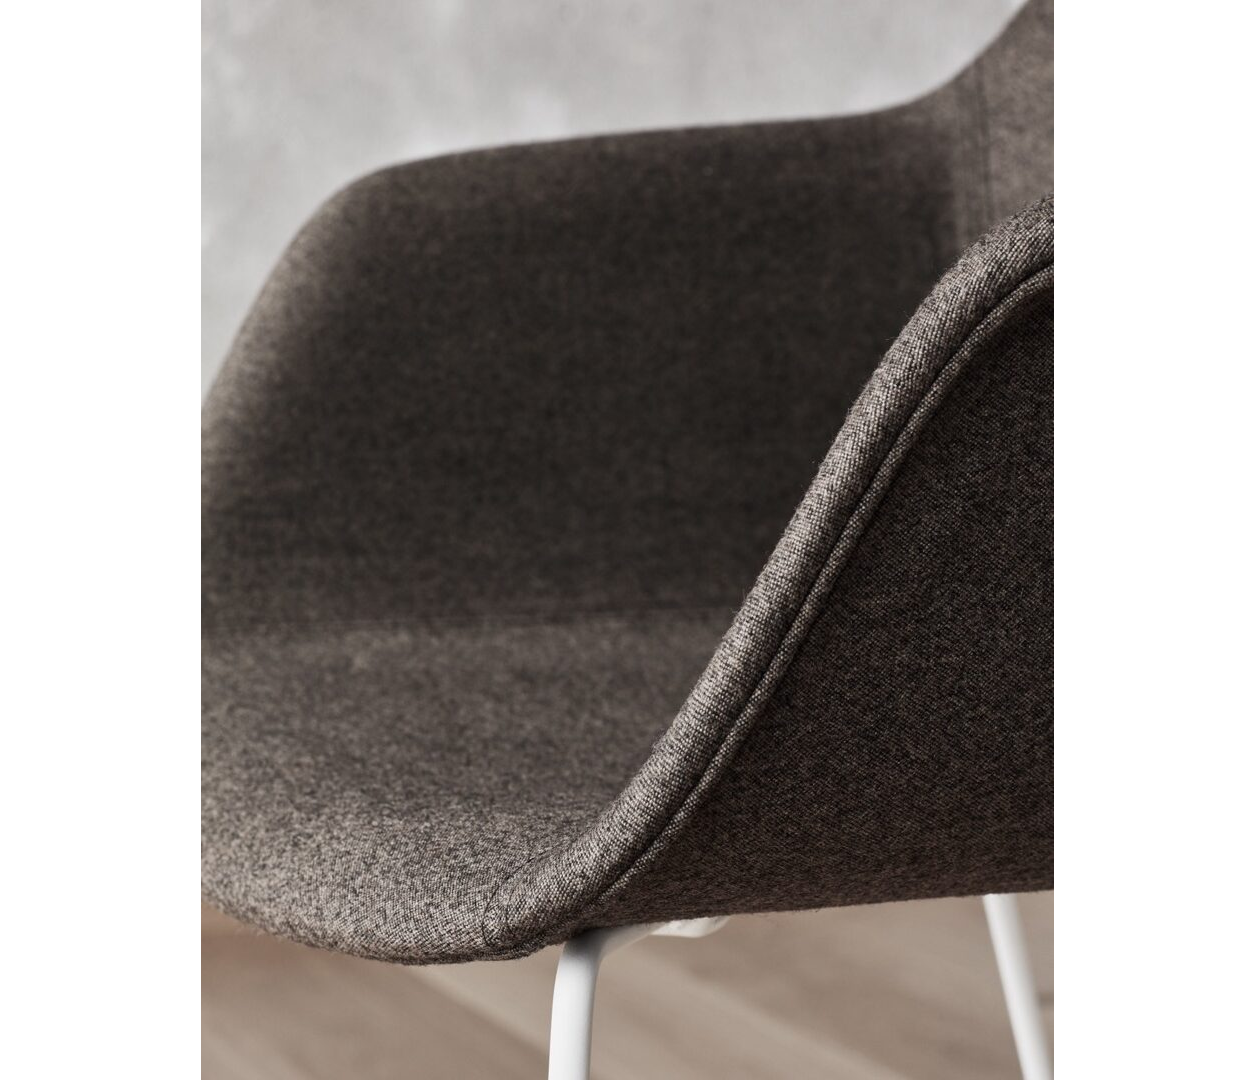 OCEE&FOUR – Chairs – FourMe 88 – Details Image 3 Large